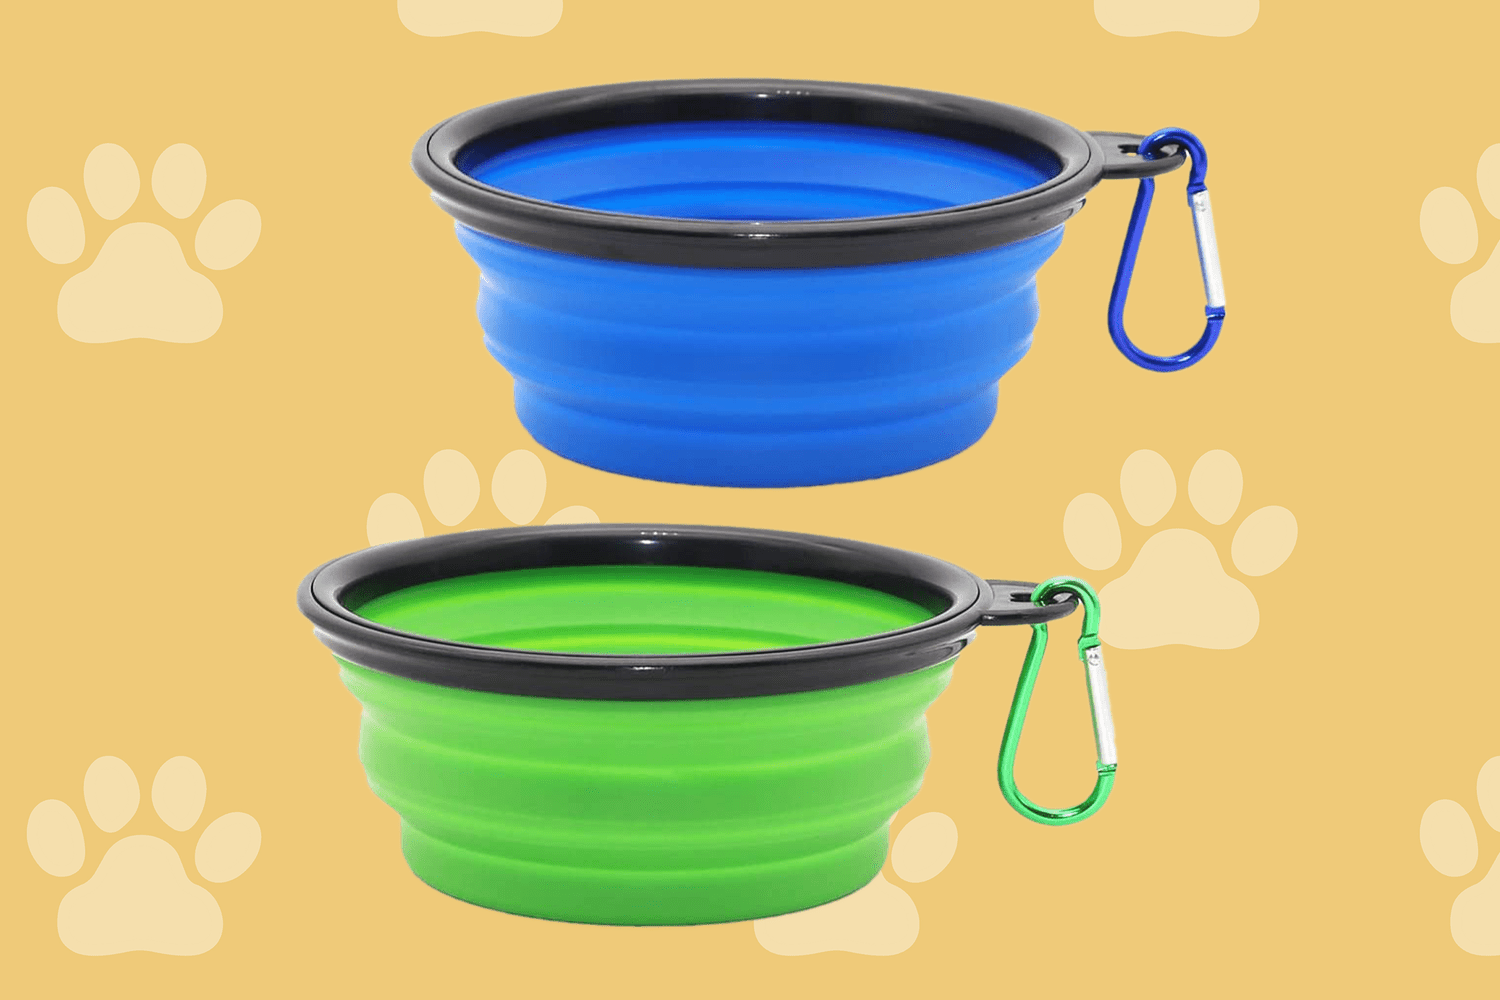 SMALL 1 Portable Travel Collapsible Pet/Dog Food/Water Bowls 